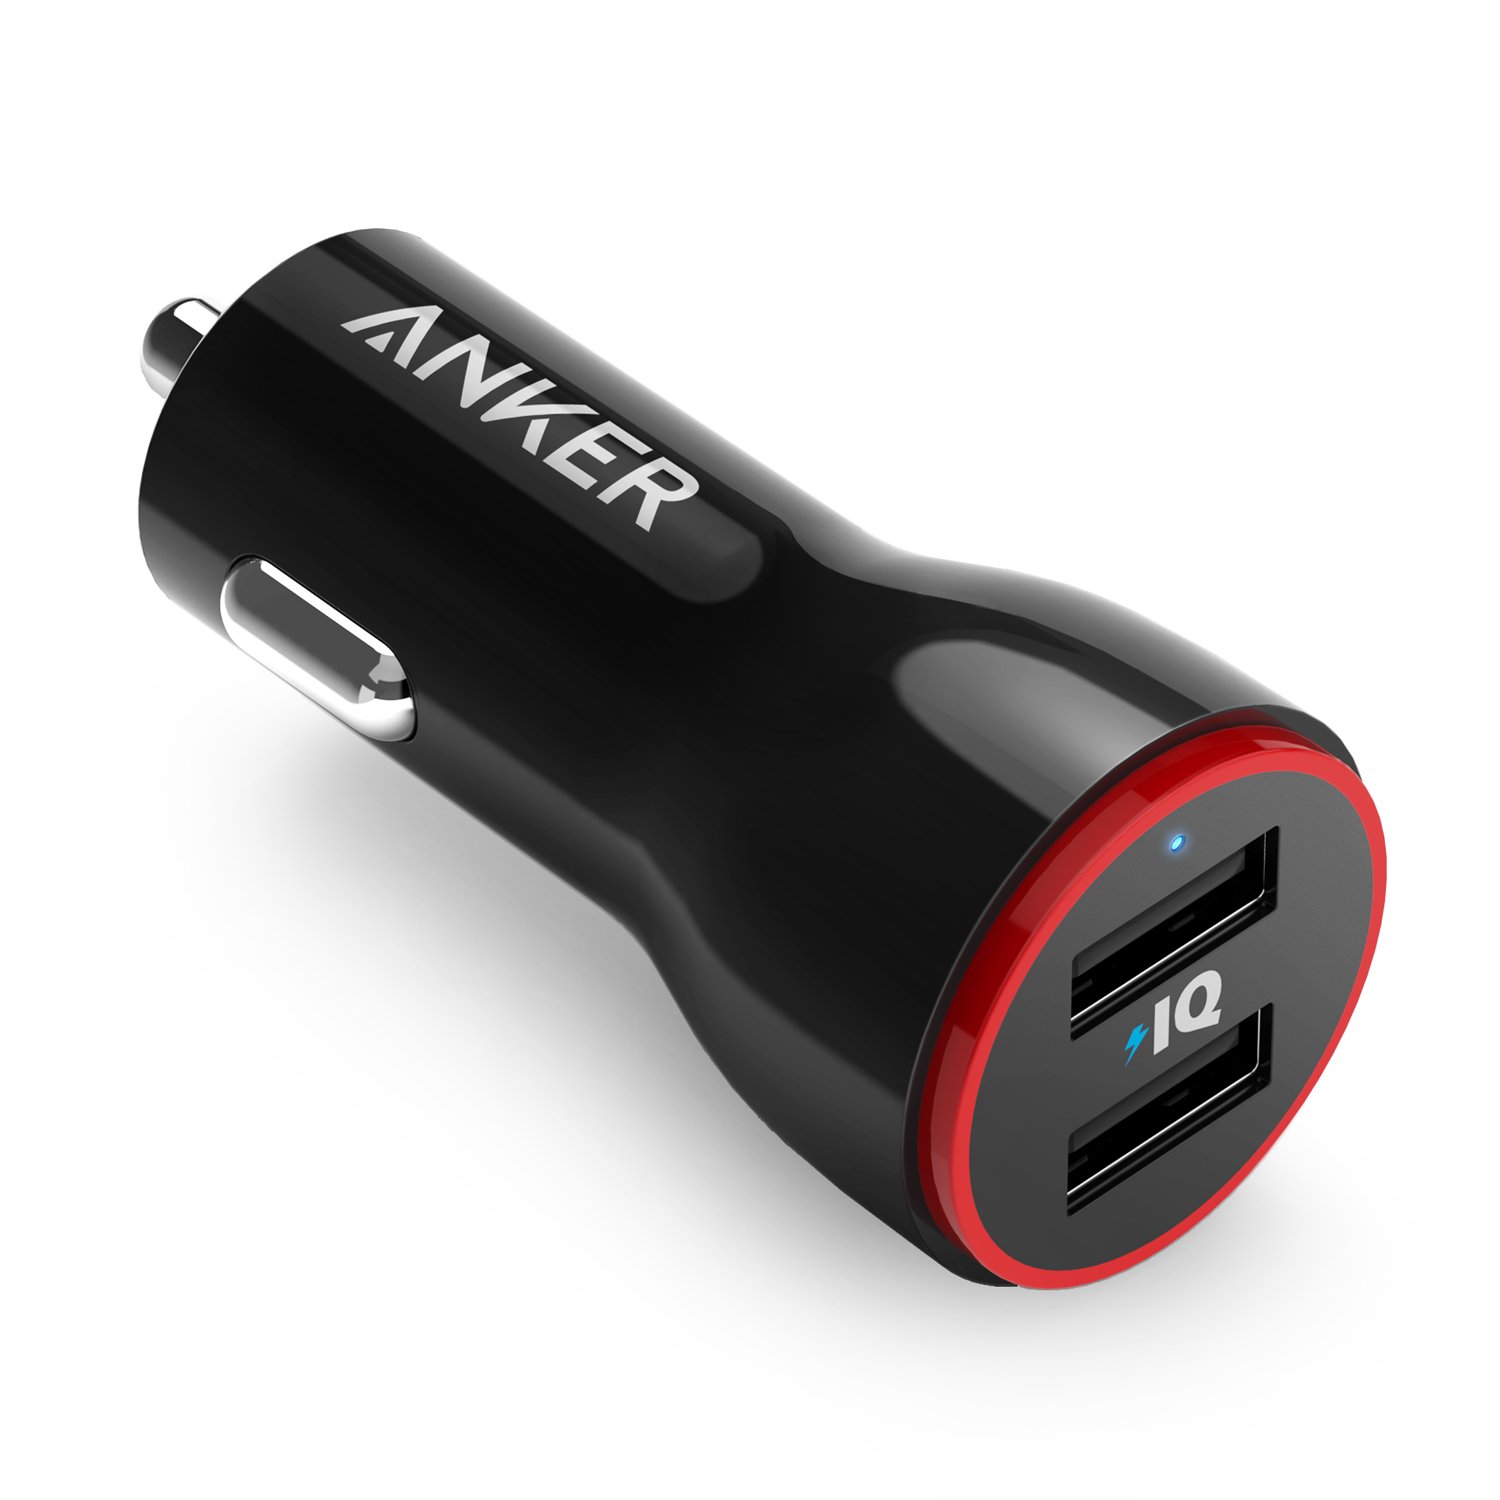 USB Car Charger supports multi-device with fast charging and safety